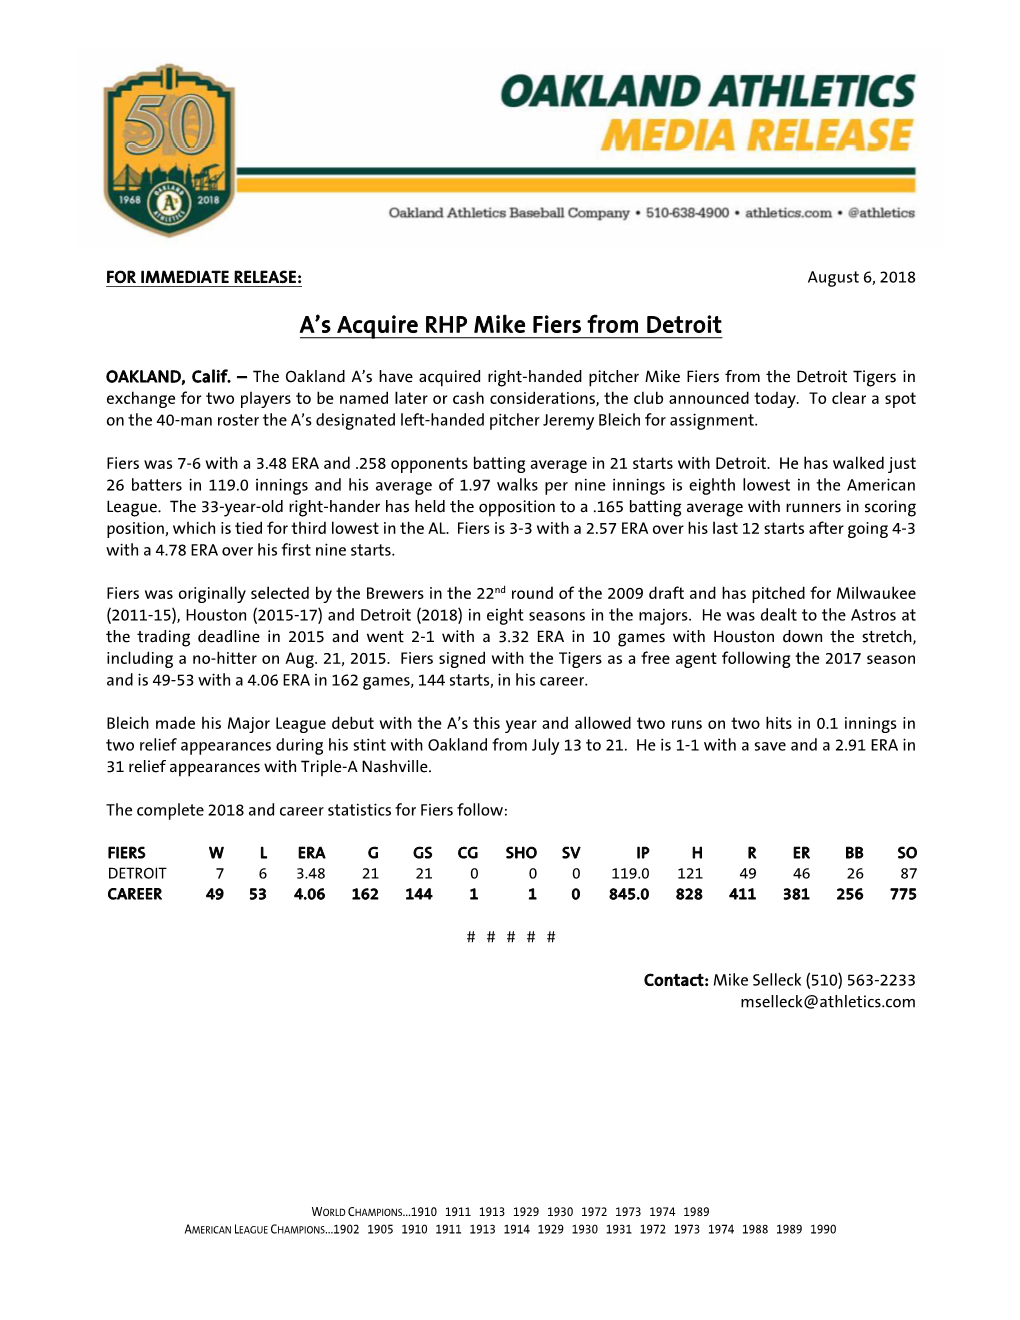 A's Acquire RHP Mike Fiers from Detroit